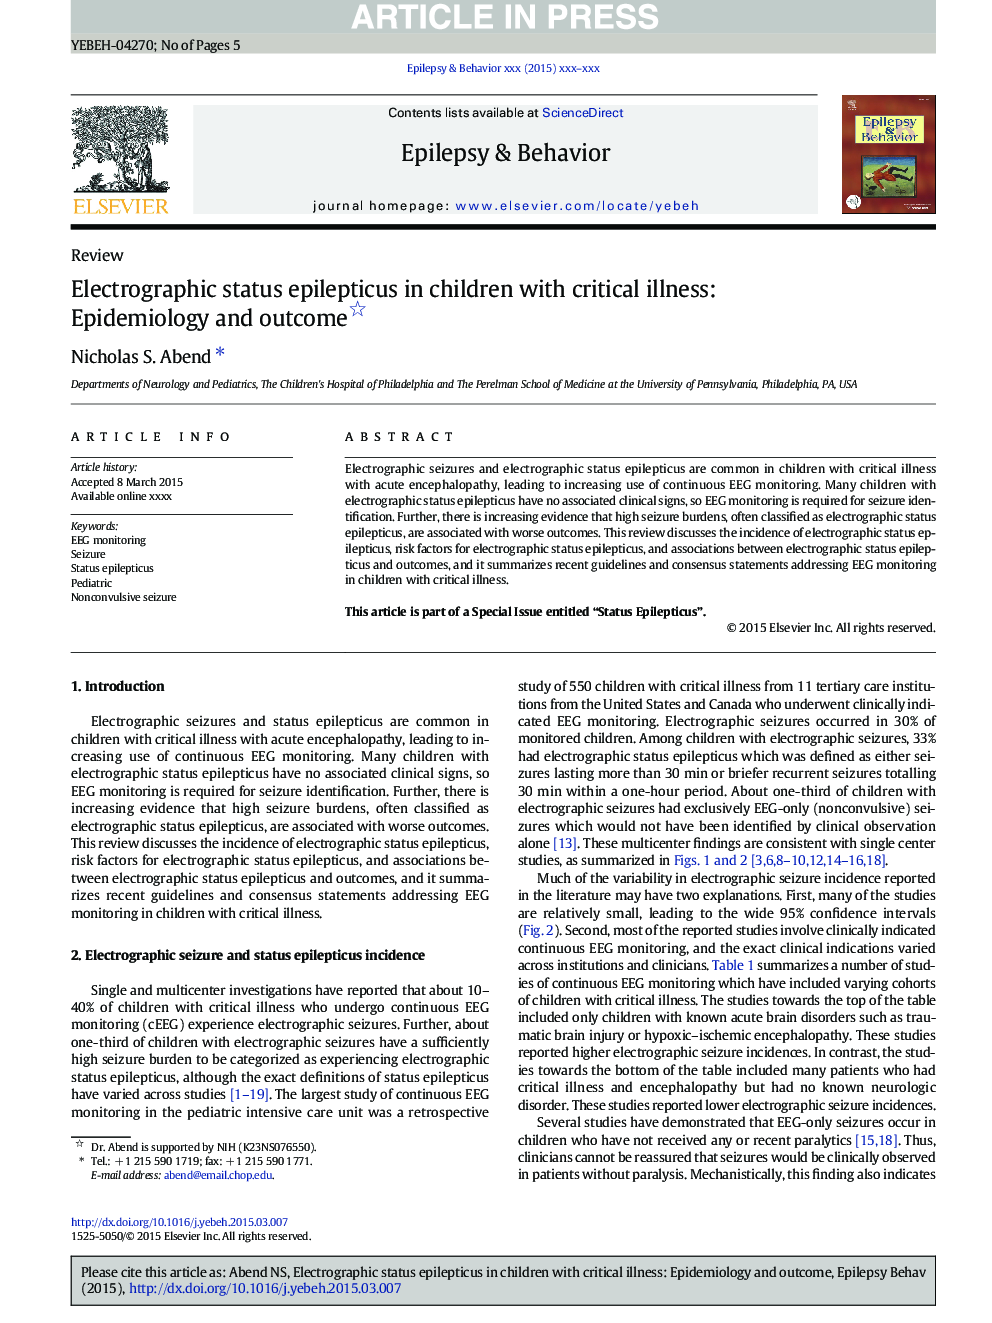 Electrographic status epilepticus in children with critical illness: Epidemiology and outcome